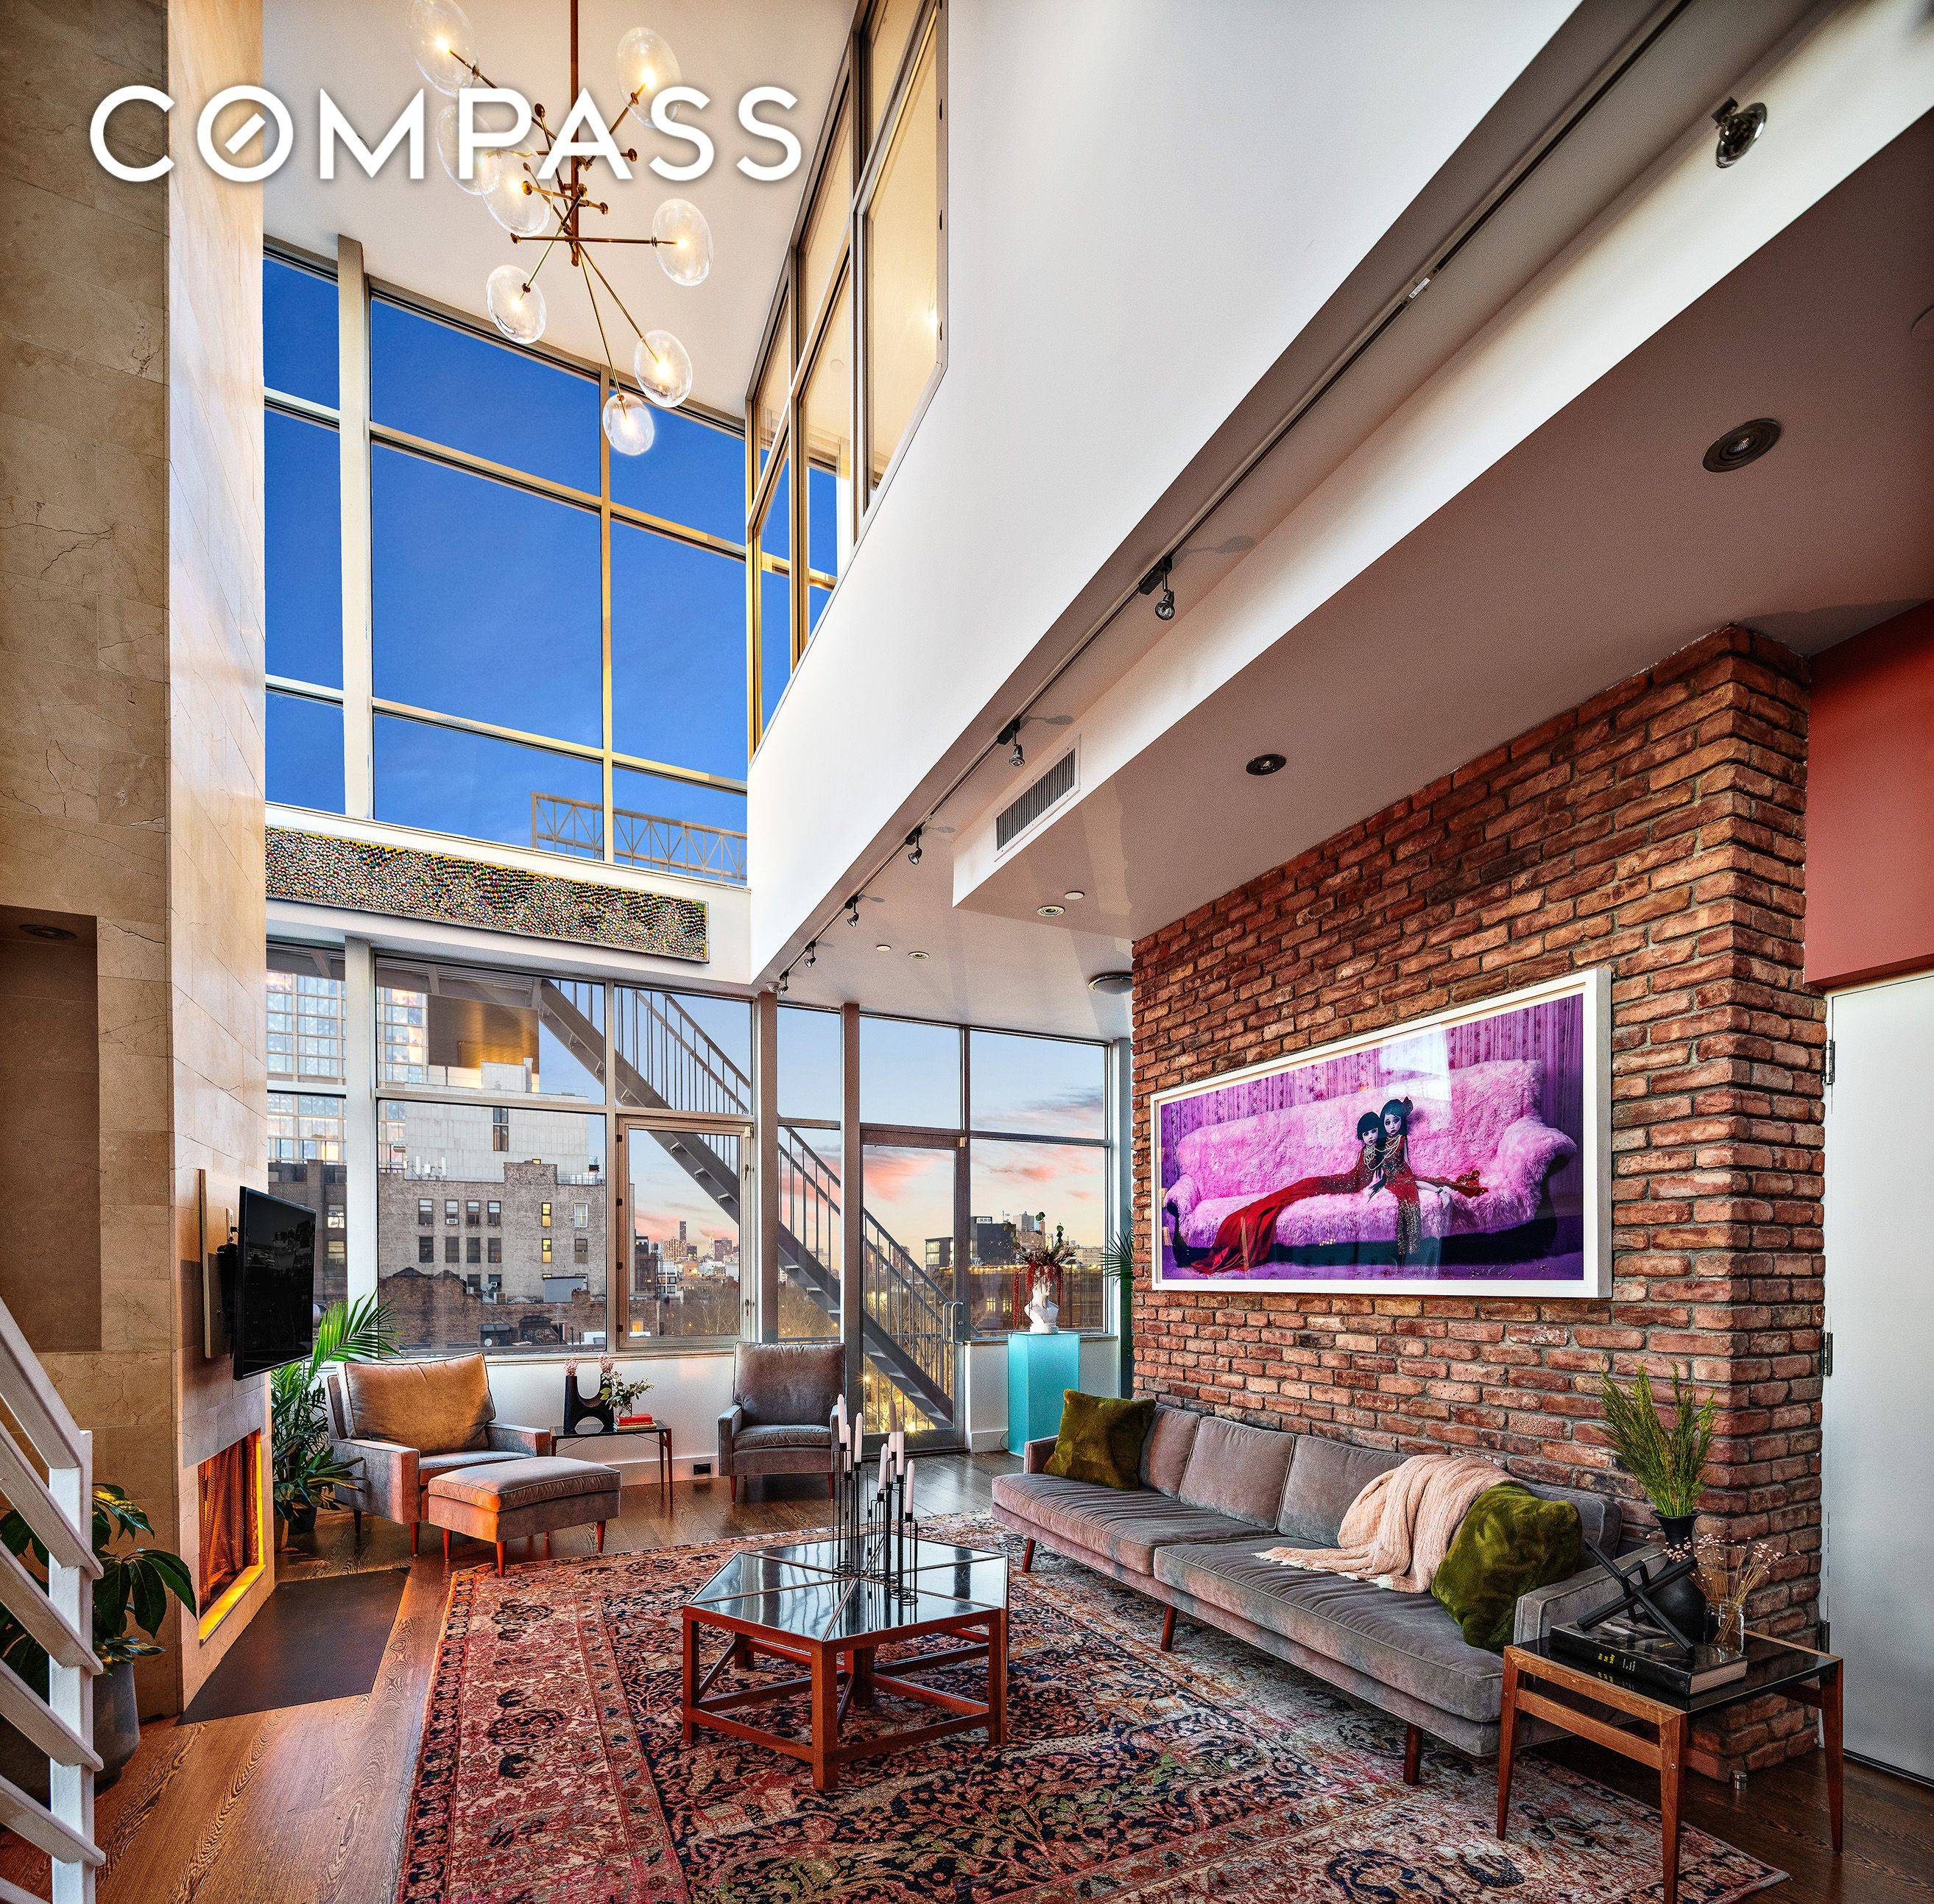 This triplex penthouse is a truly exceptional and luxurious living space.